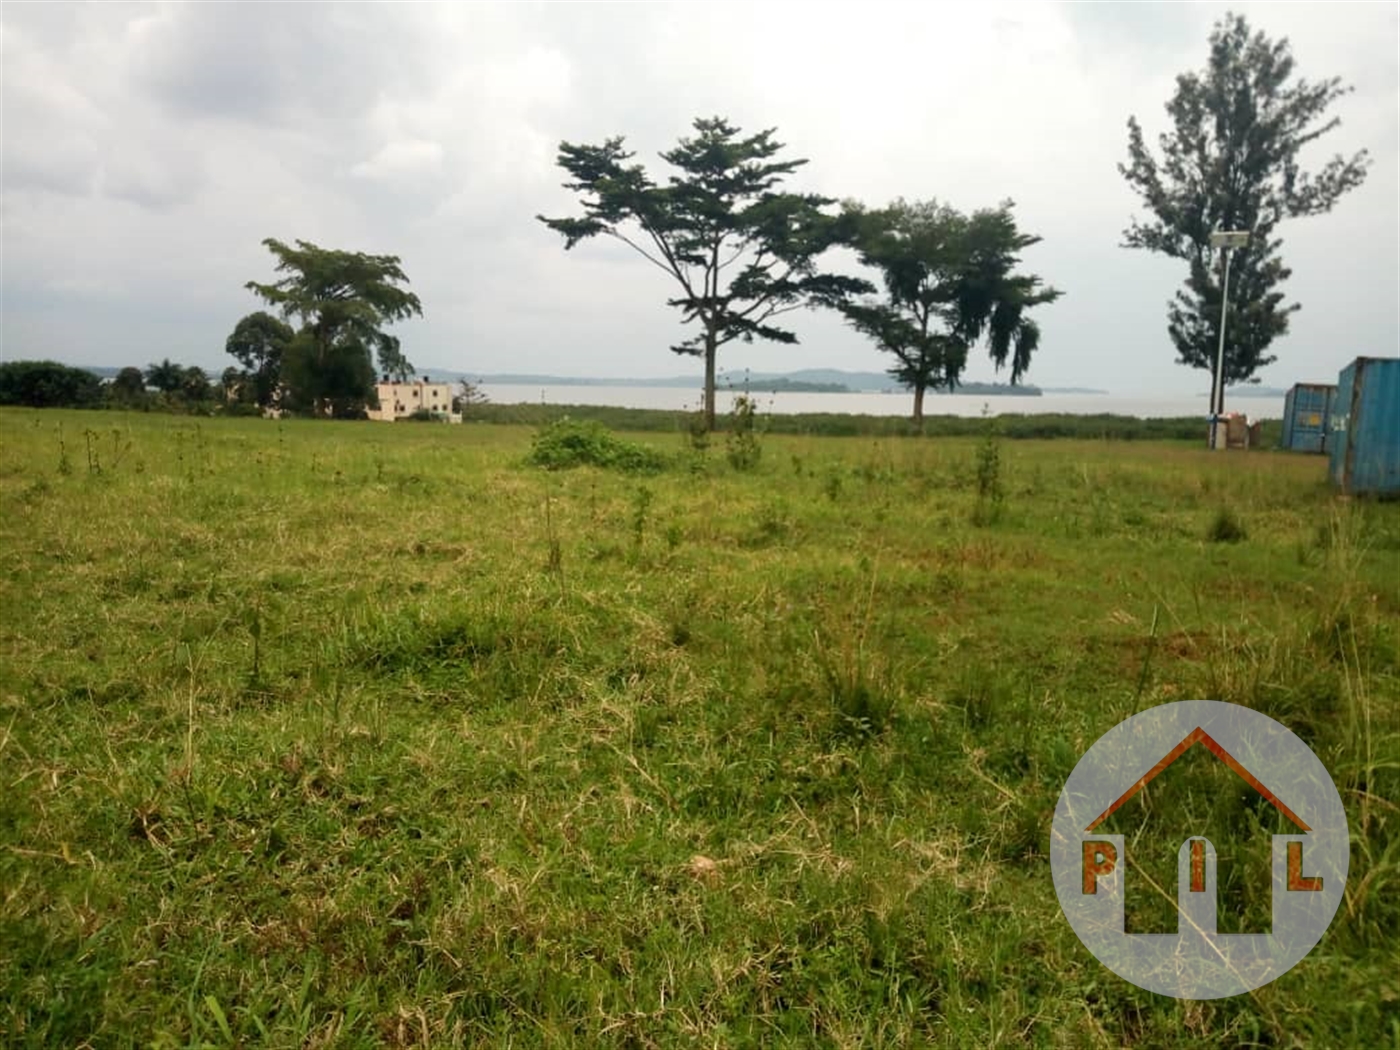 Industrial Land for sale in Luzira Kampala